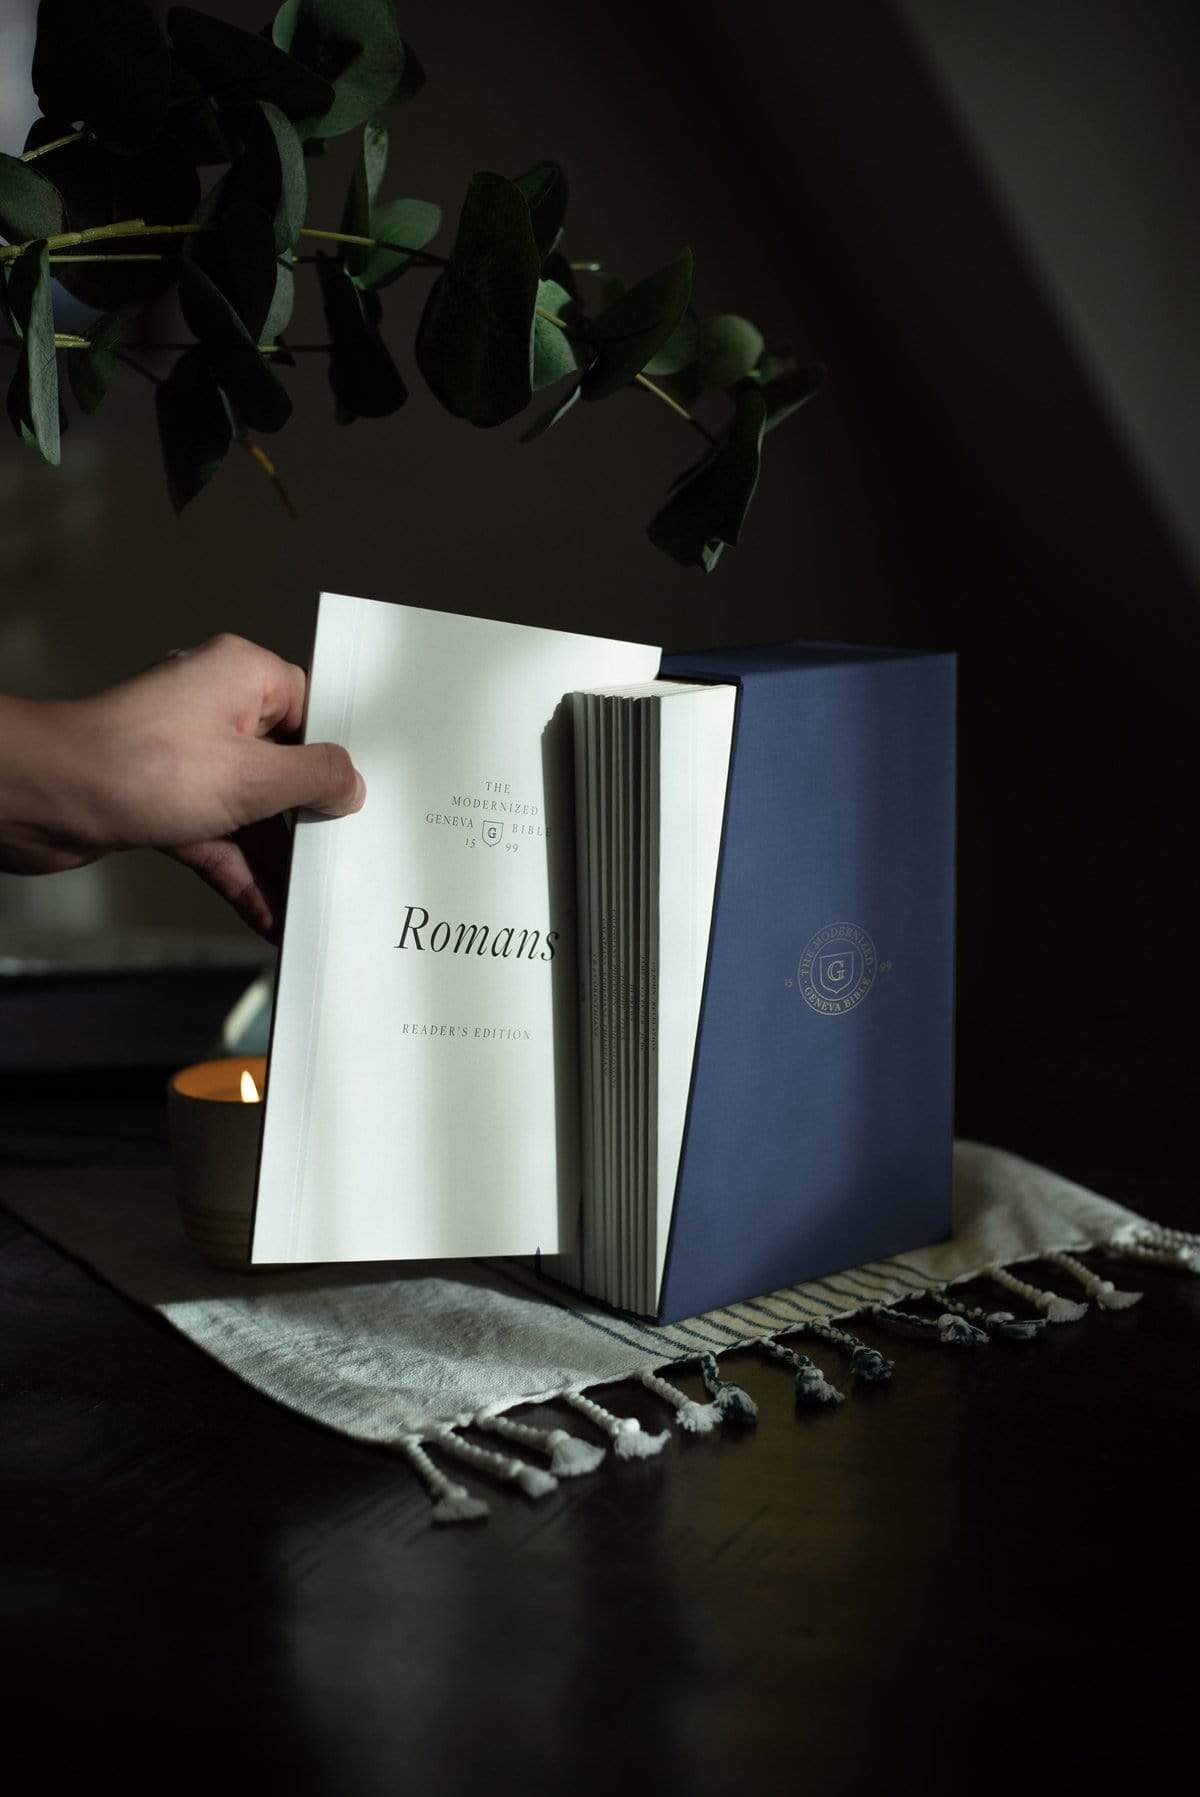 This is an image of the Boxed set of the Geneva New Testament. This one shows the Gospel of Romans a slim volume.